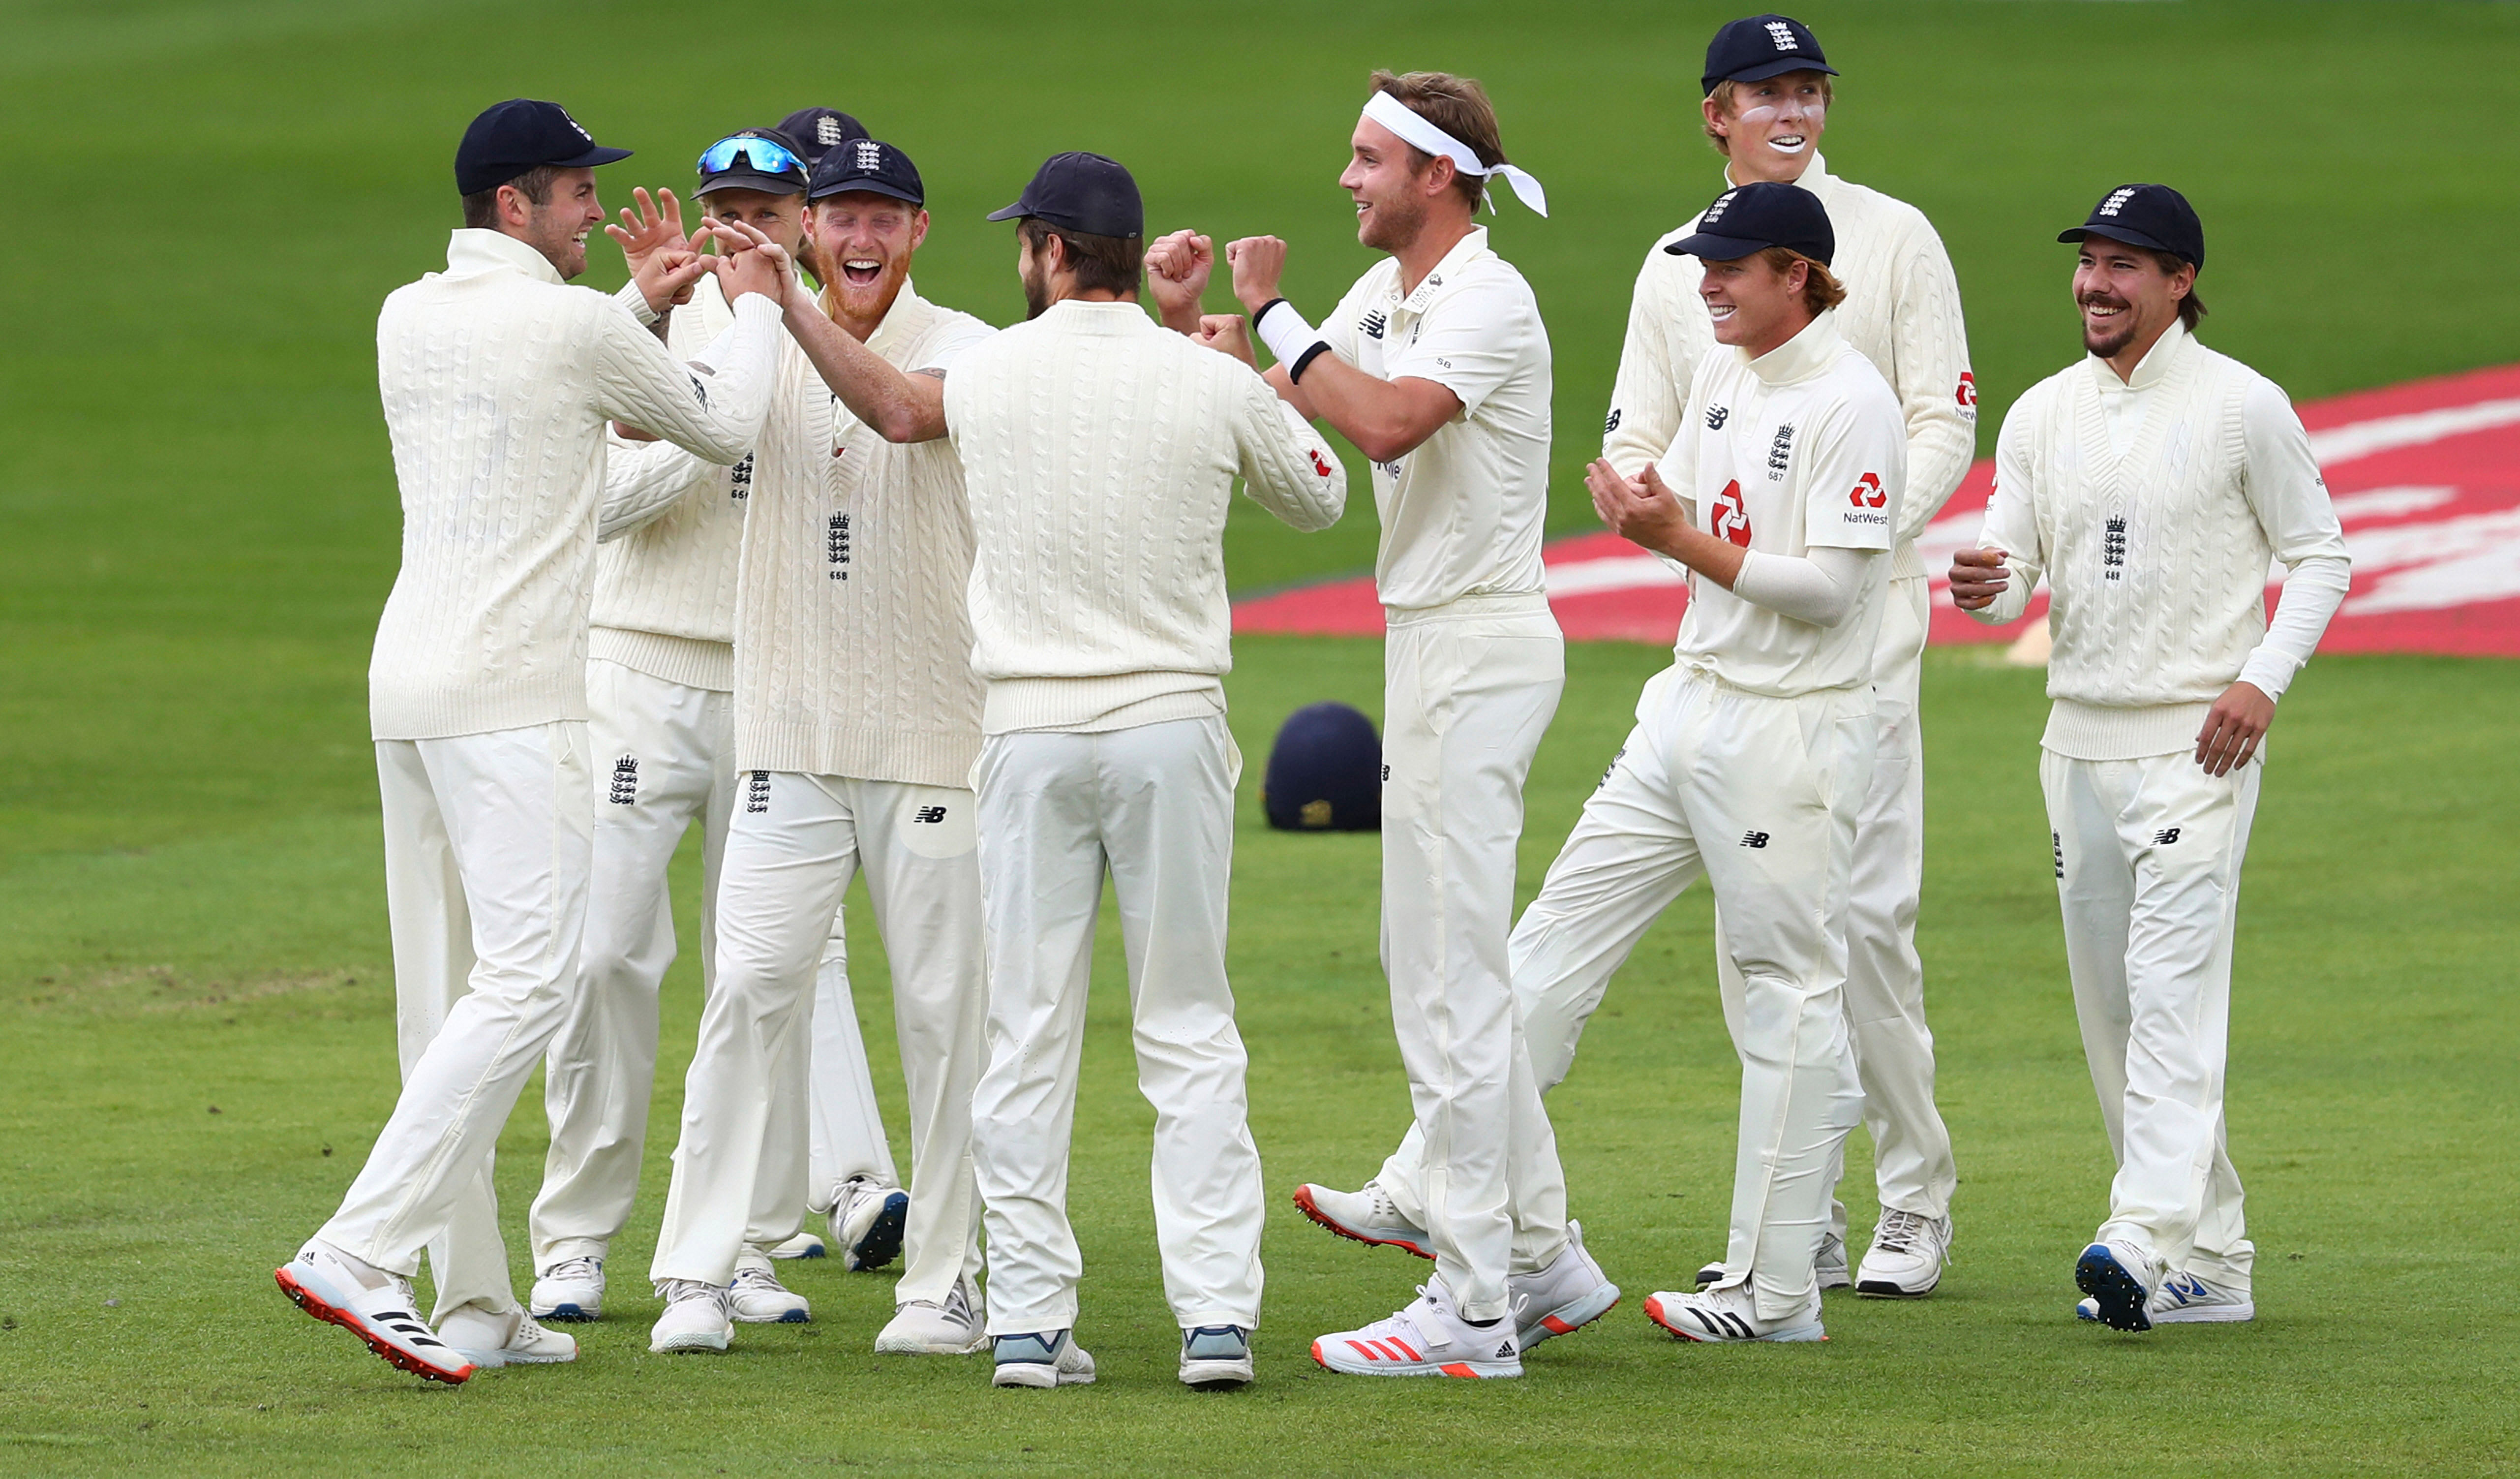 England's Stuart Broad, center, and teammates celebrate the dismissal of West Indies' John Campbell during the last day of the second cricket Test match between England and West Indies at Old Trafford. Credits: AP Photo